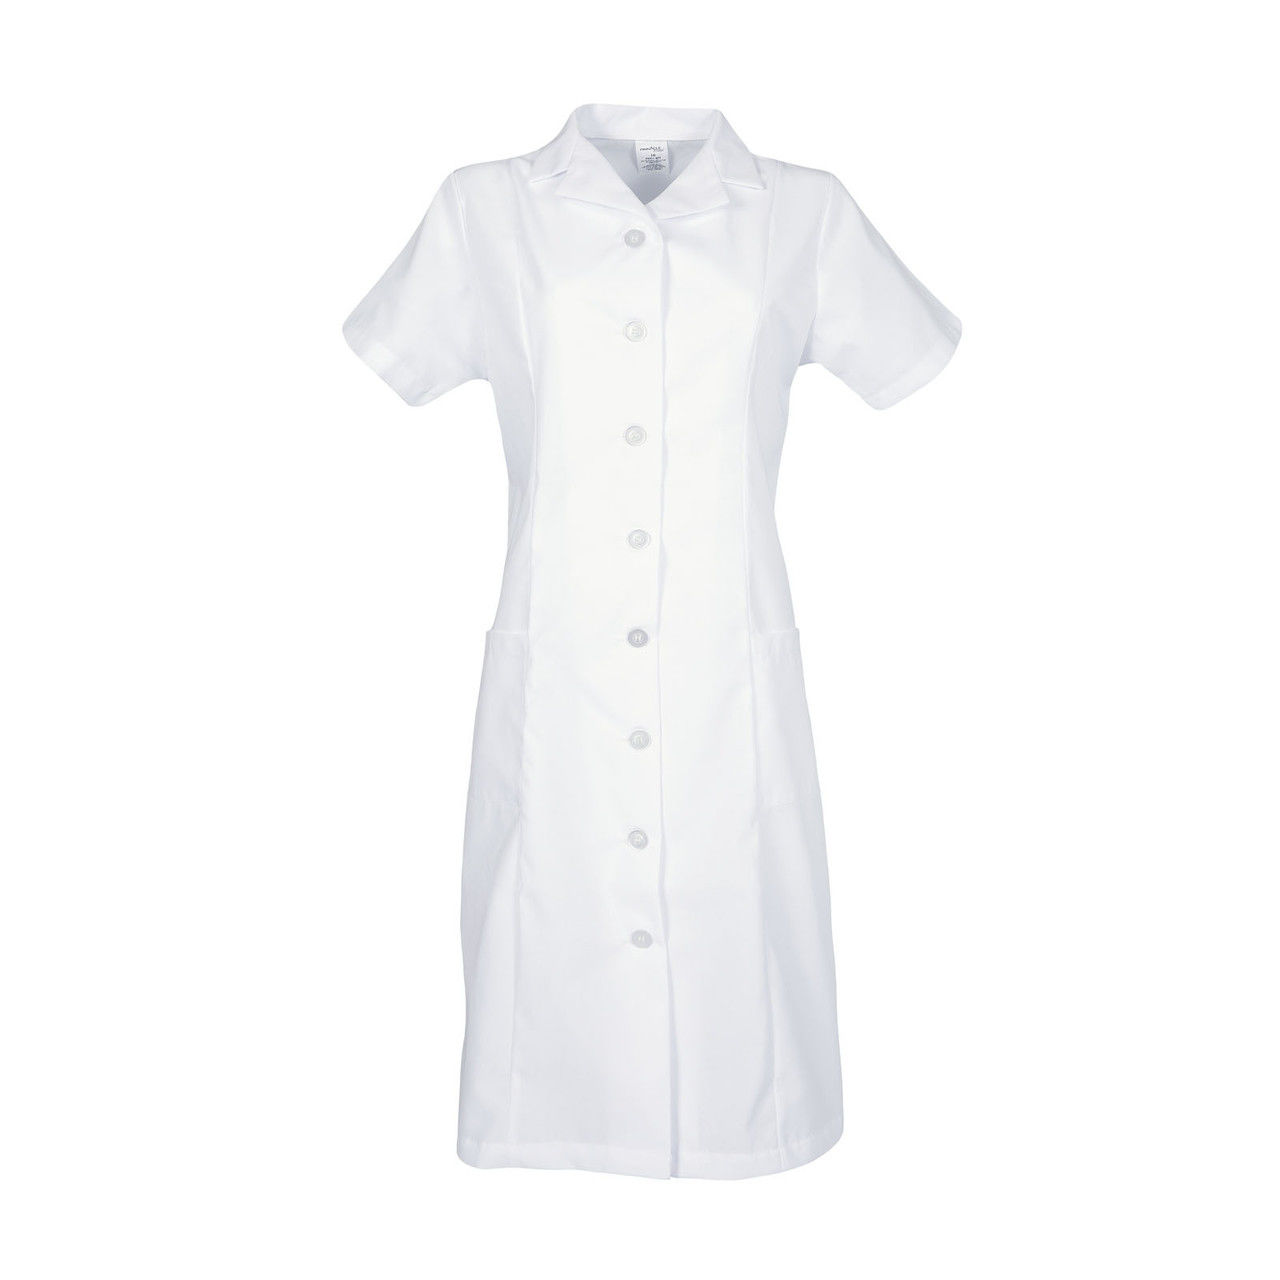 Does the white uniform dress have a specific type of closure?